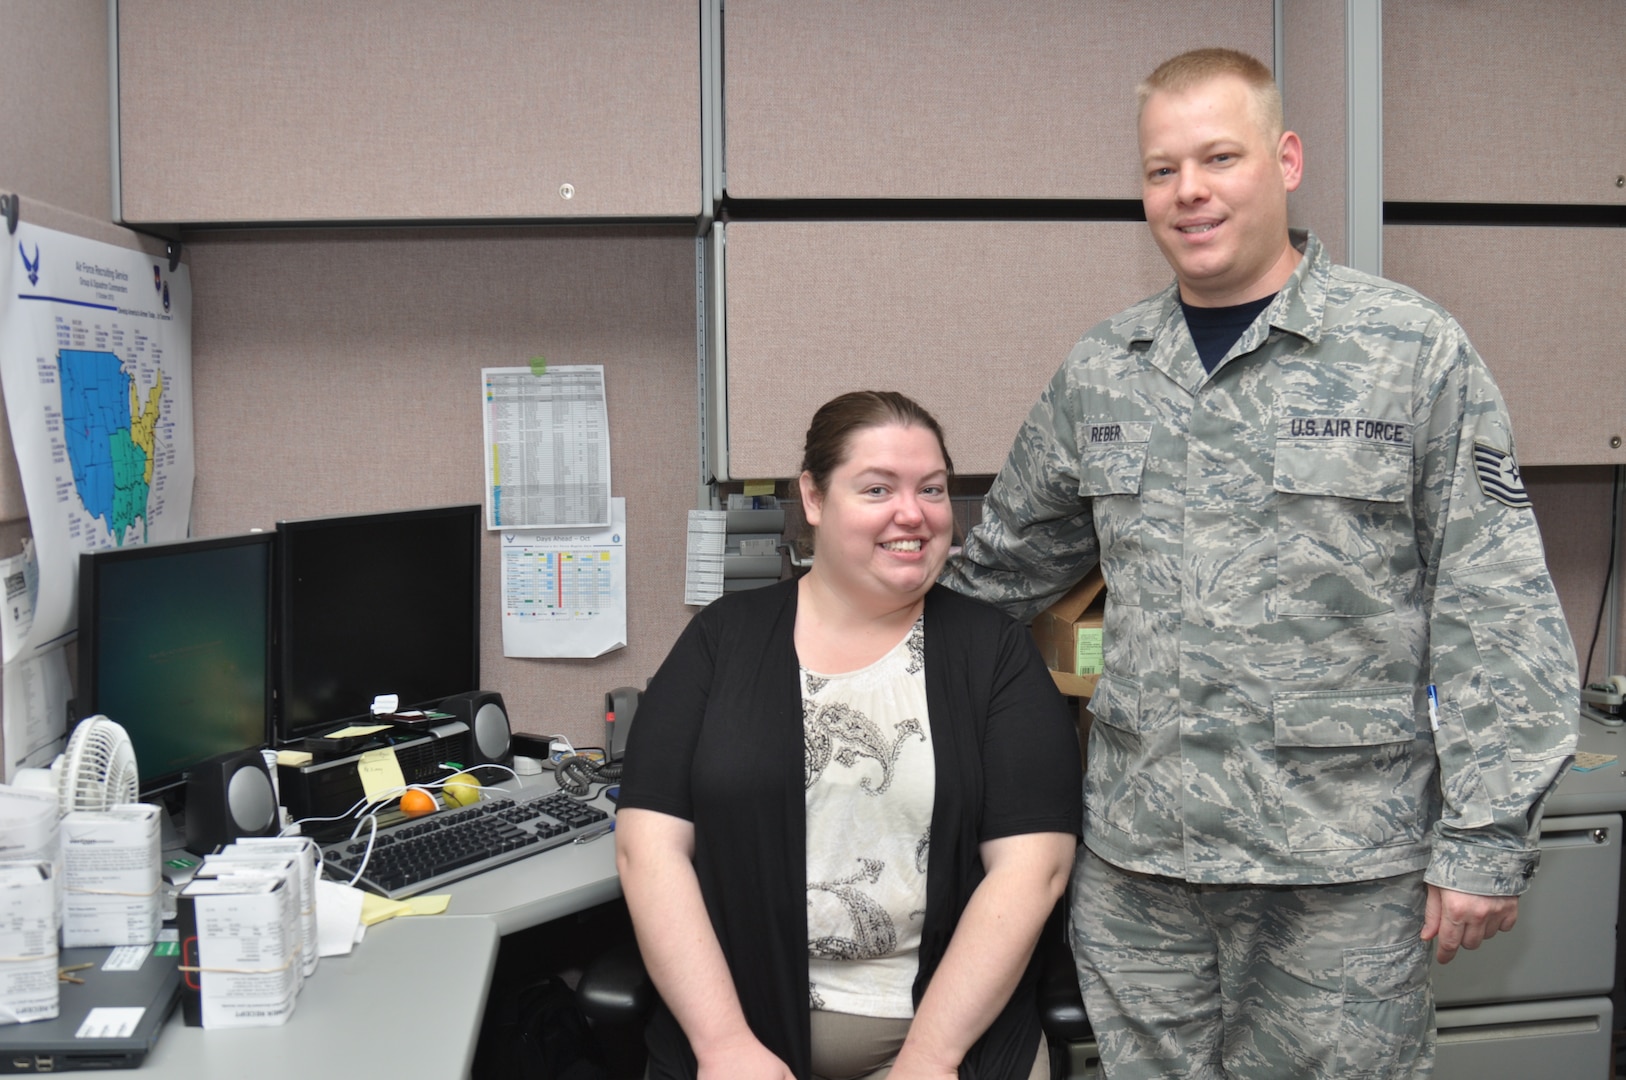 Tech. Sgt. Daniel Reber, Headquarters Air Force Recruiting Service client systems technician, and his wife, Tanya Reber, Headquarters AFRS Key Spouse, use teamwork to accomplish the mission.  The couple combines social media concepts and delivery to create an online information exchange for the spouses of personnel assigned to the headquarters. They also want to reach out to AFRS spouses worldwide. (U.S. Air Force photo/Tech. Sgt. Hillary Stonemetz)